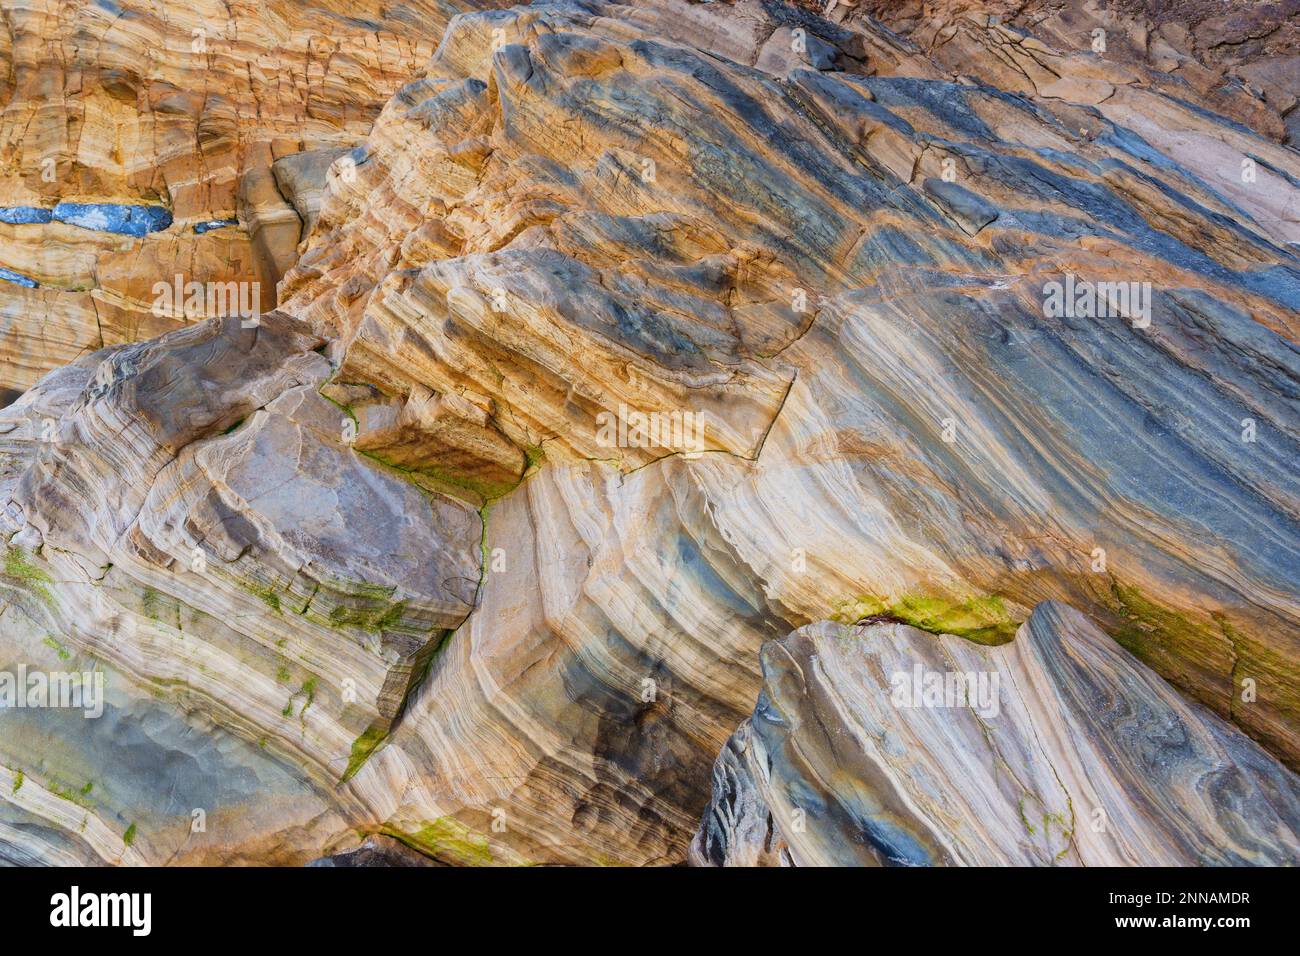 Natural background made of layered rocks, creating an intriguing and unique design. Stock Photo